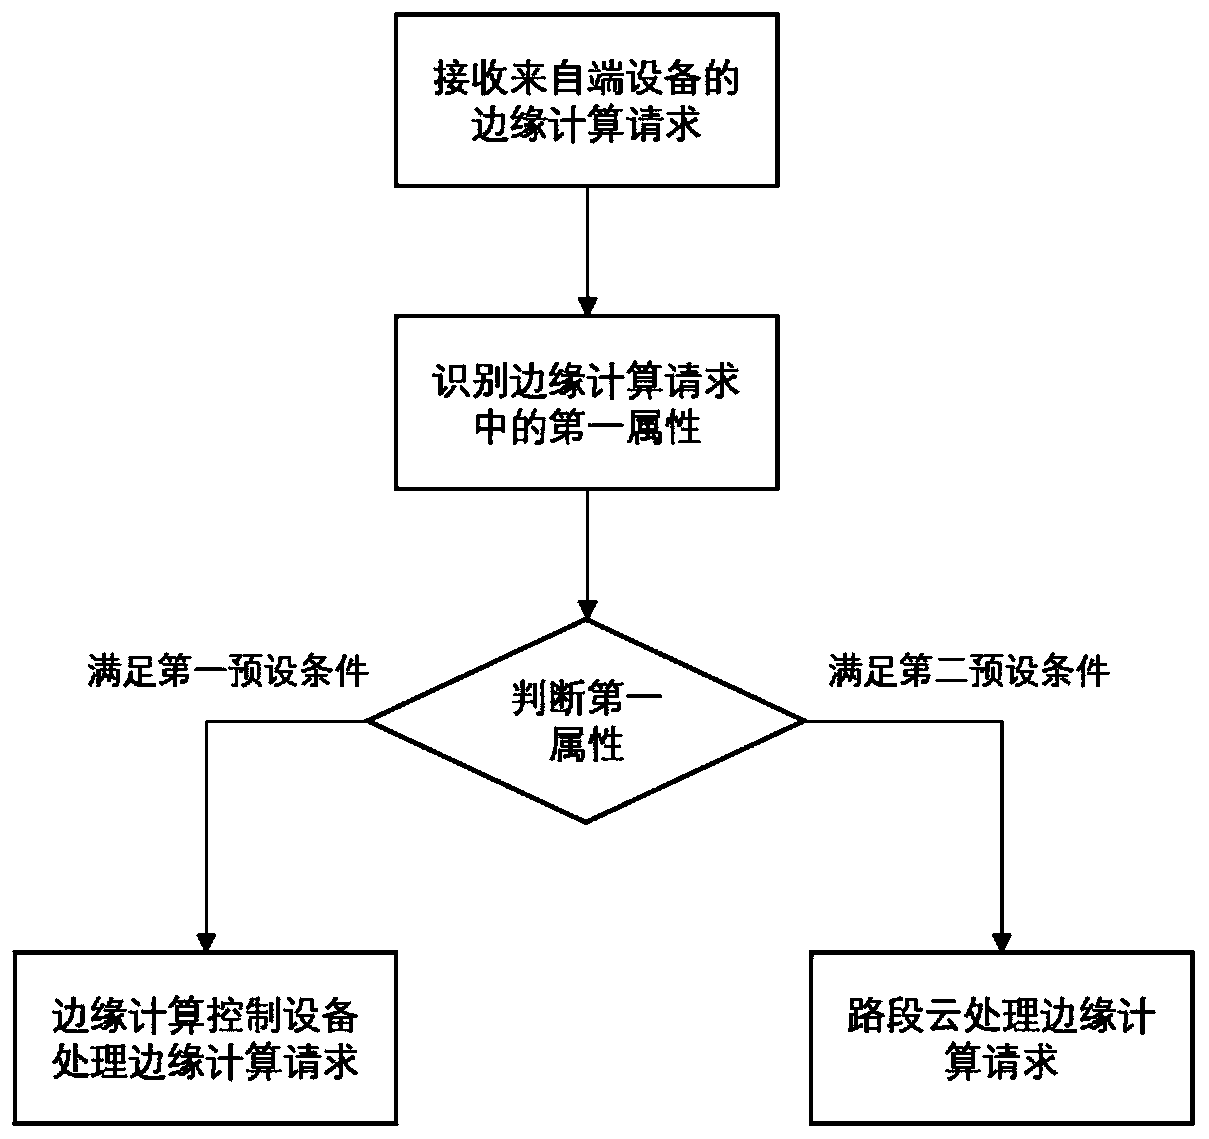 Cloud-side collaborative expressway cloud control system and control method